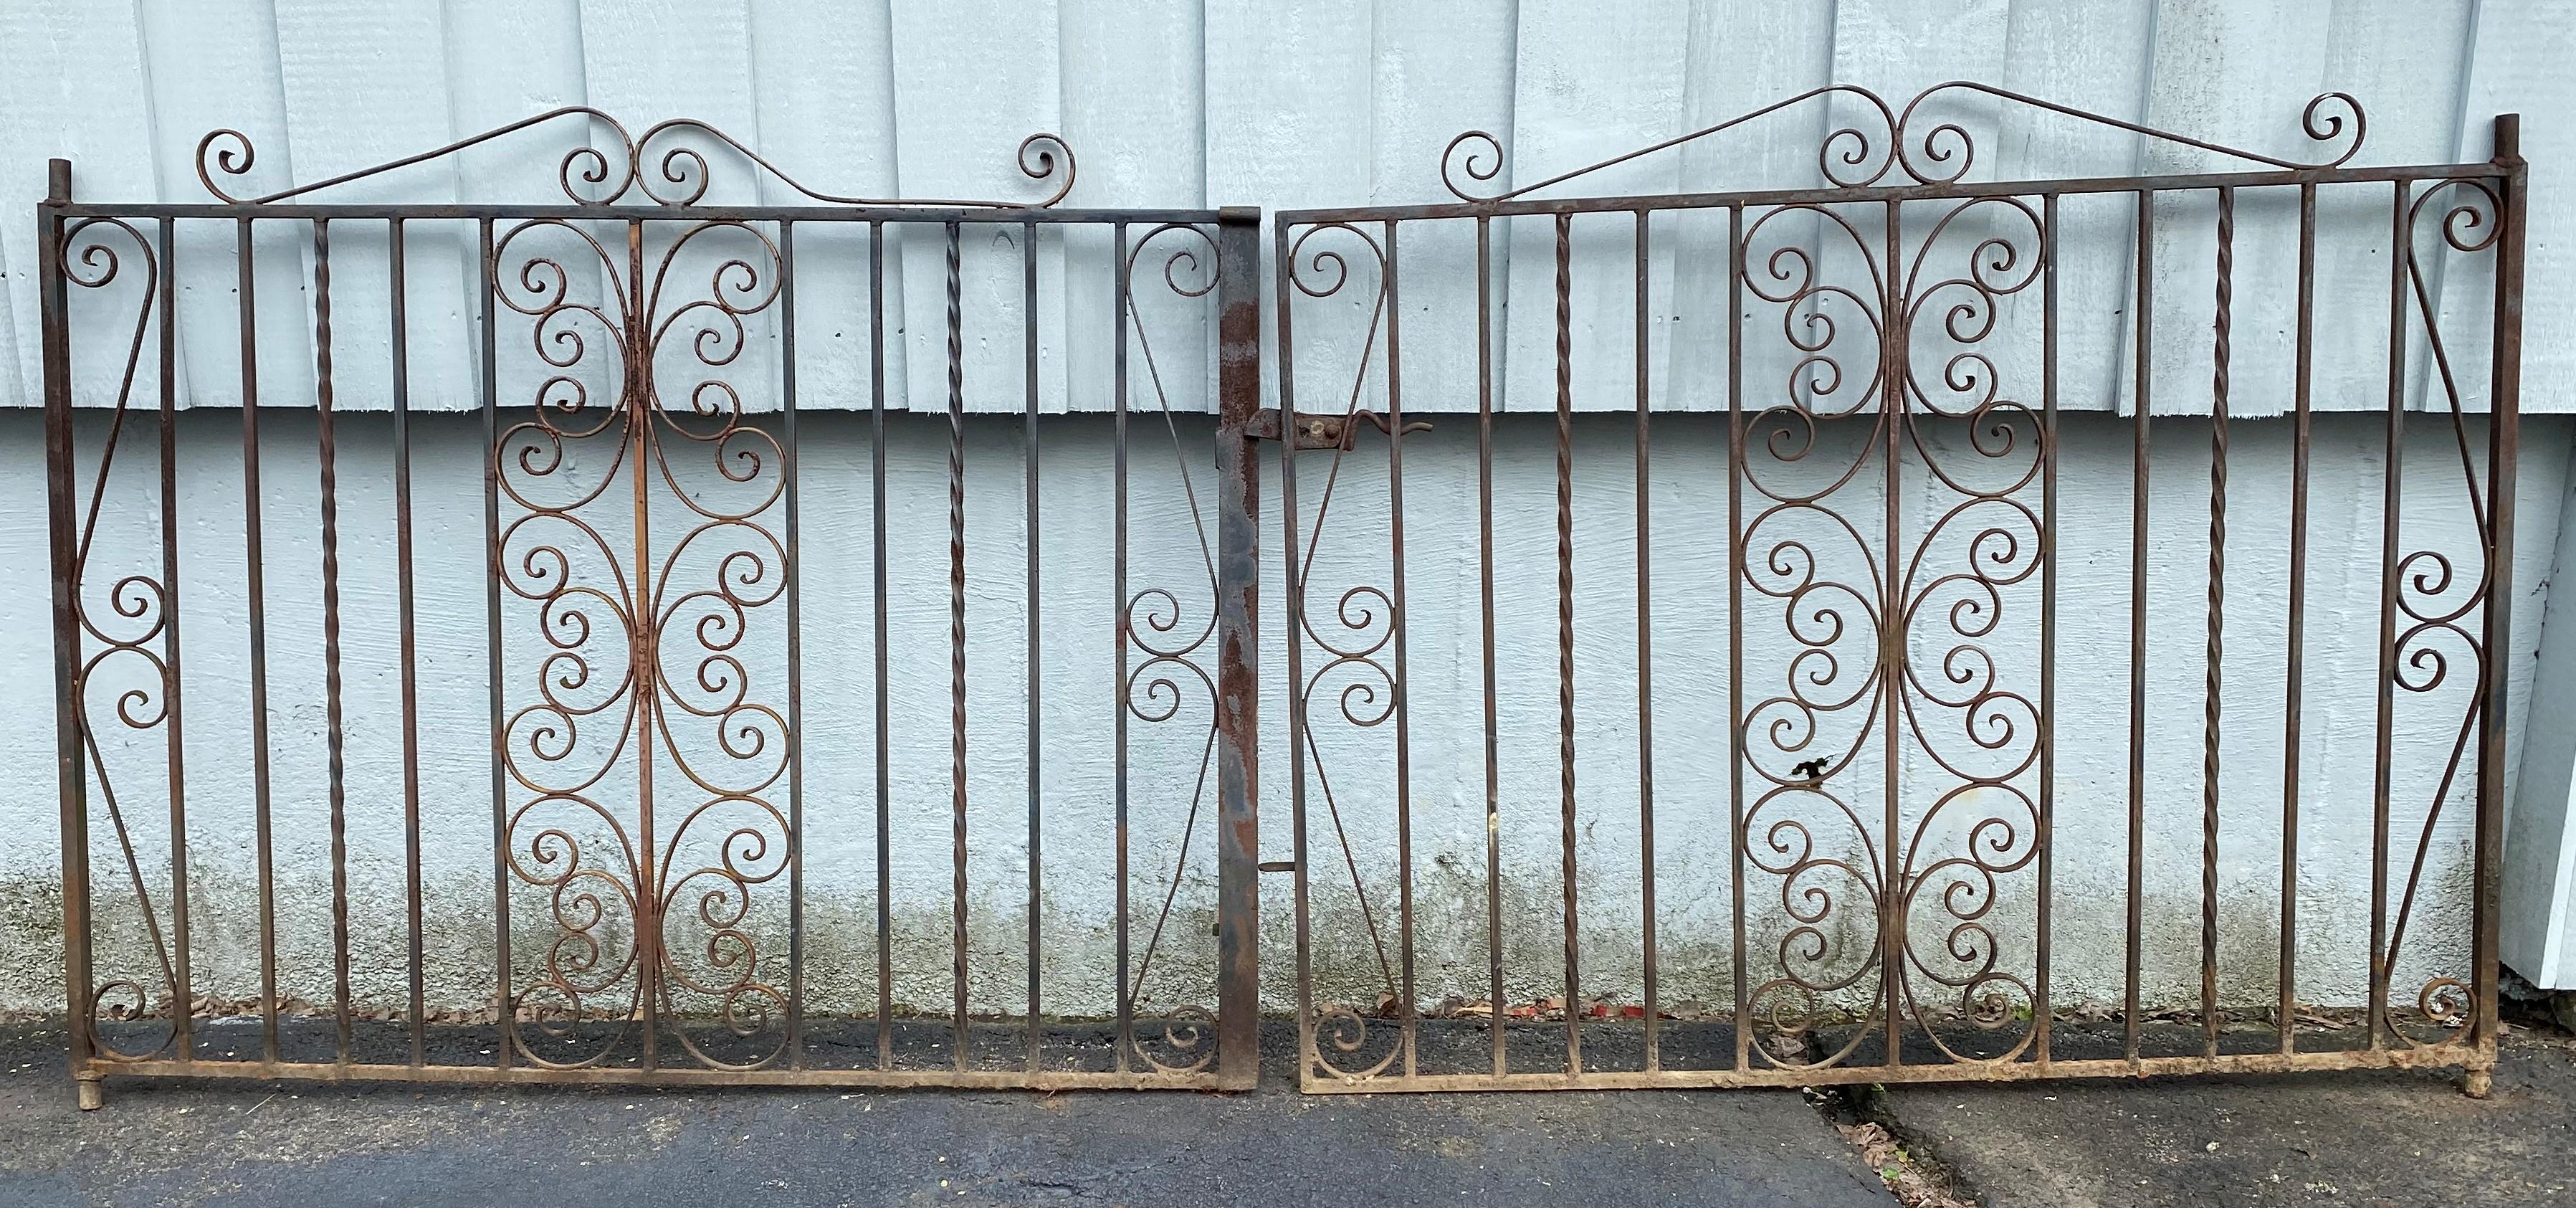 Pair of Iron Gates with Scrollwork Design For Sale 5